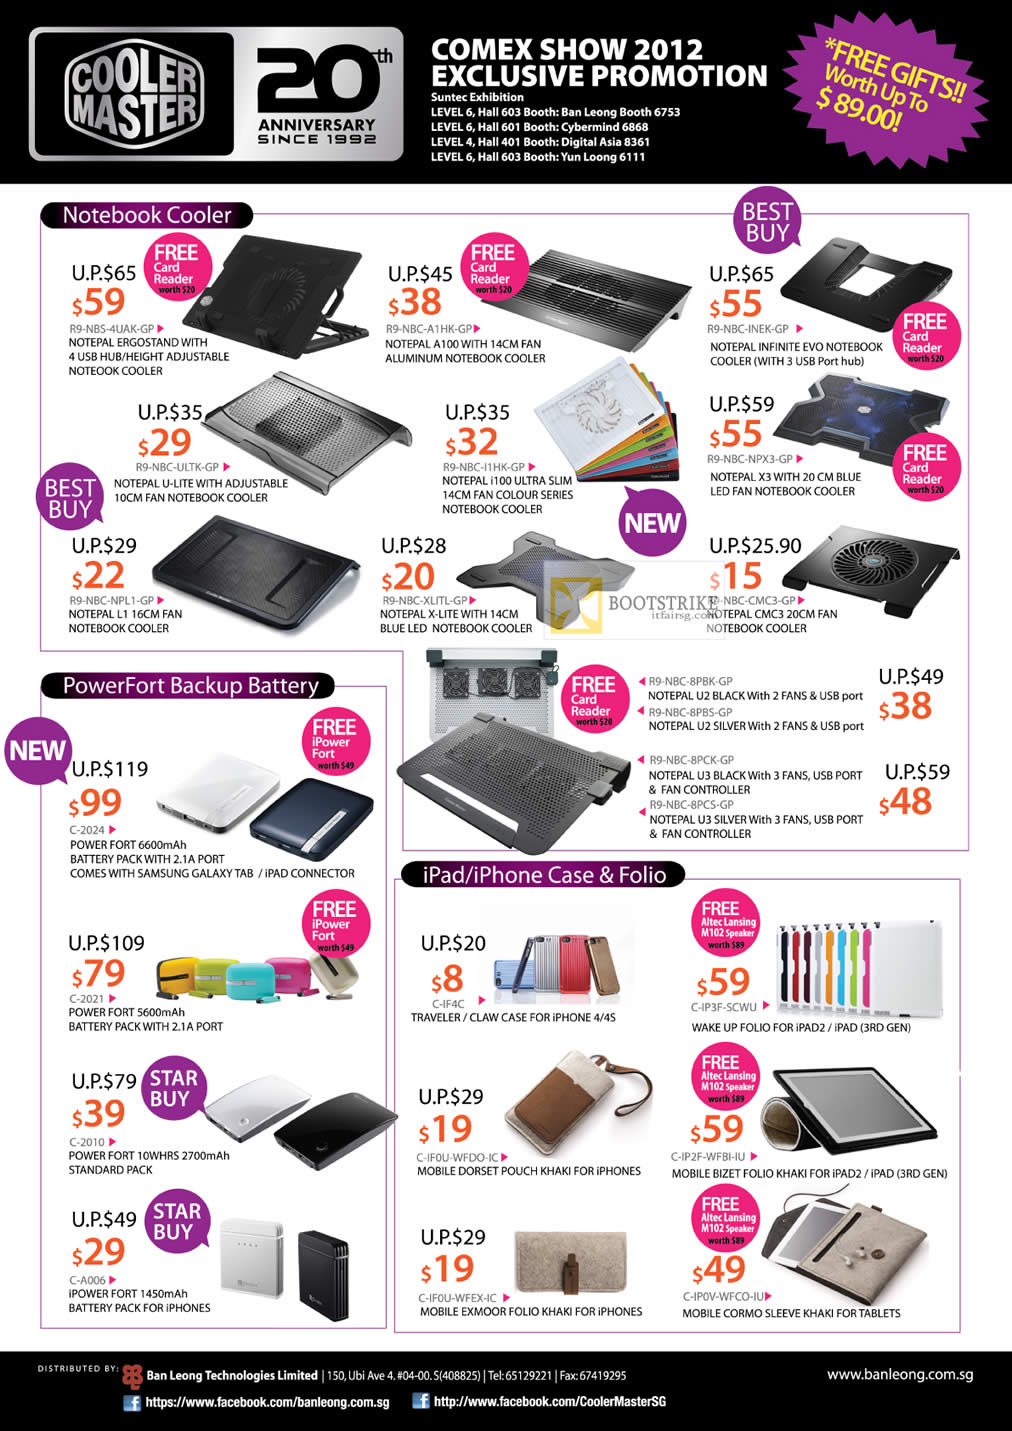 COMEX 2012 price list image brochure of Ban Leong Cooler Master Notebook Coolers Cooling Pad Notepa, Infinite, X3, U-Lite, PowerFort Battery Charger, IPad IPhone Case Folio